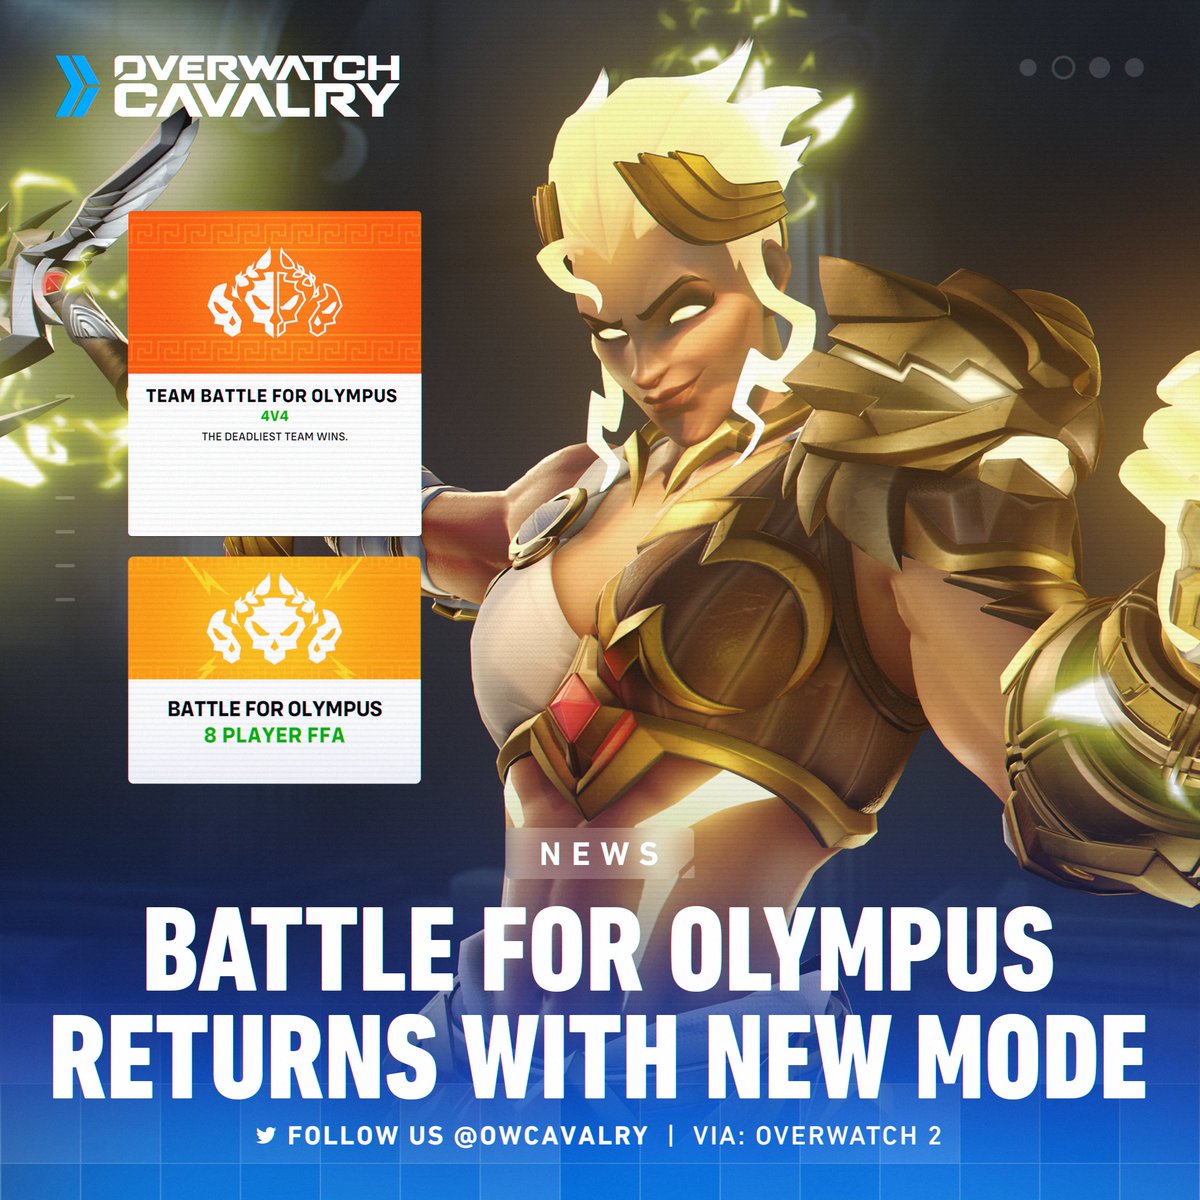 Battle for Olympus is back in #Overwatch2 with a brand-new mode 🌩

Play as these god-like heroes with augmented abilities in a 4v4 Team Deathmatch, meaning you can now play this mode with friends! The FFA version has also returned to the Arcade 🕹

🗓 May 23 — May 30